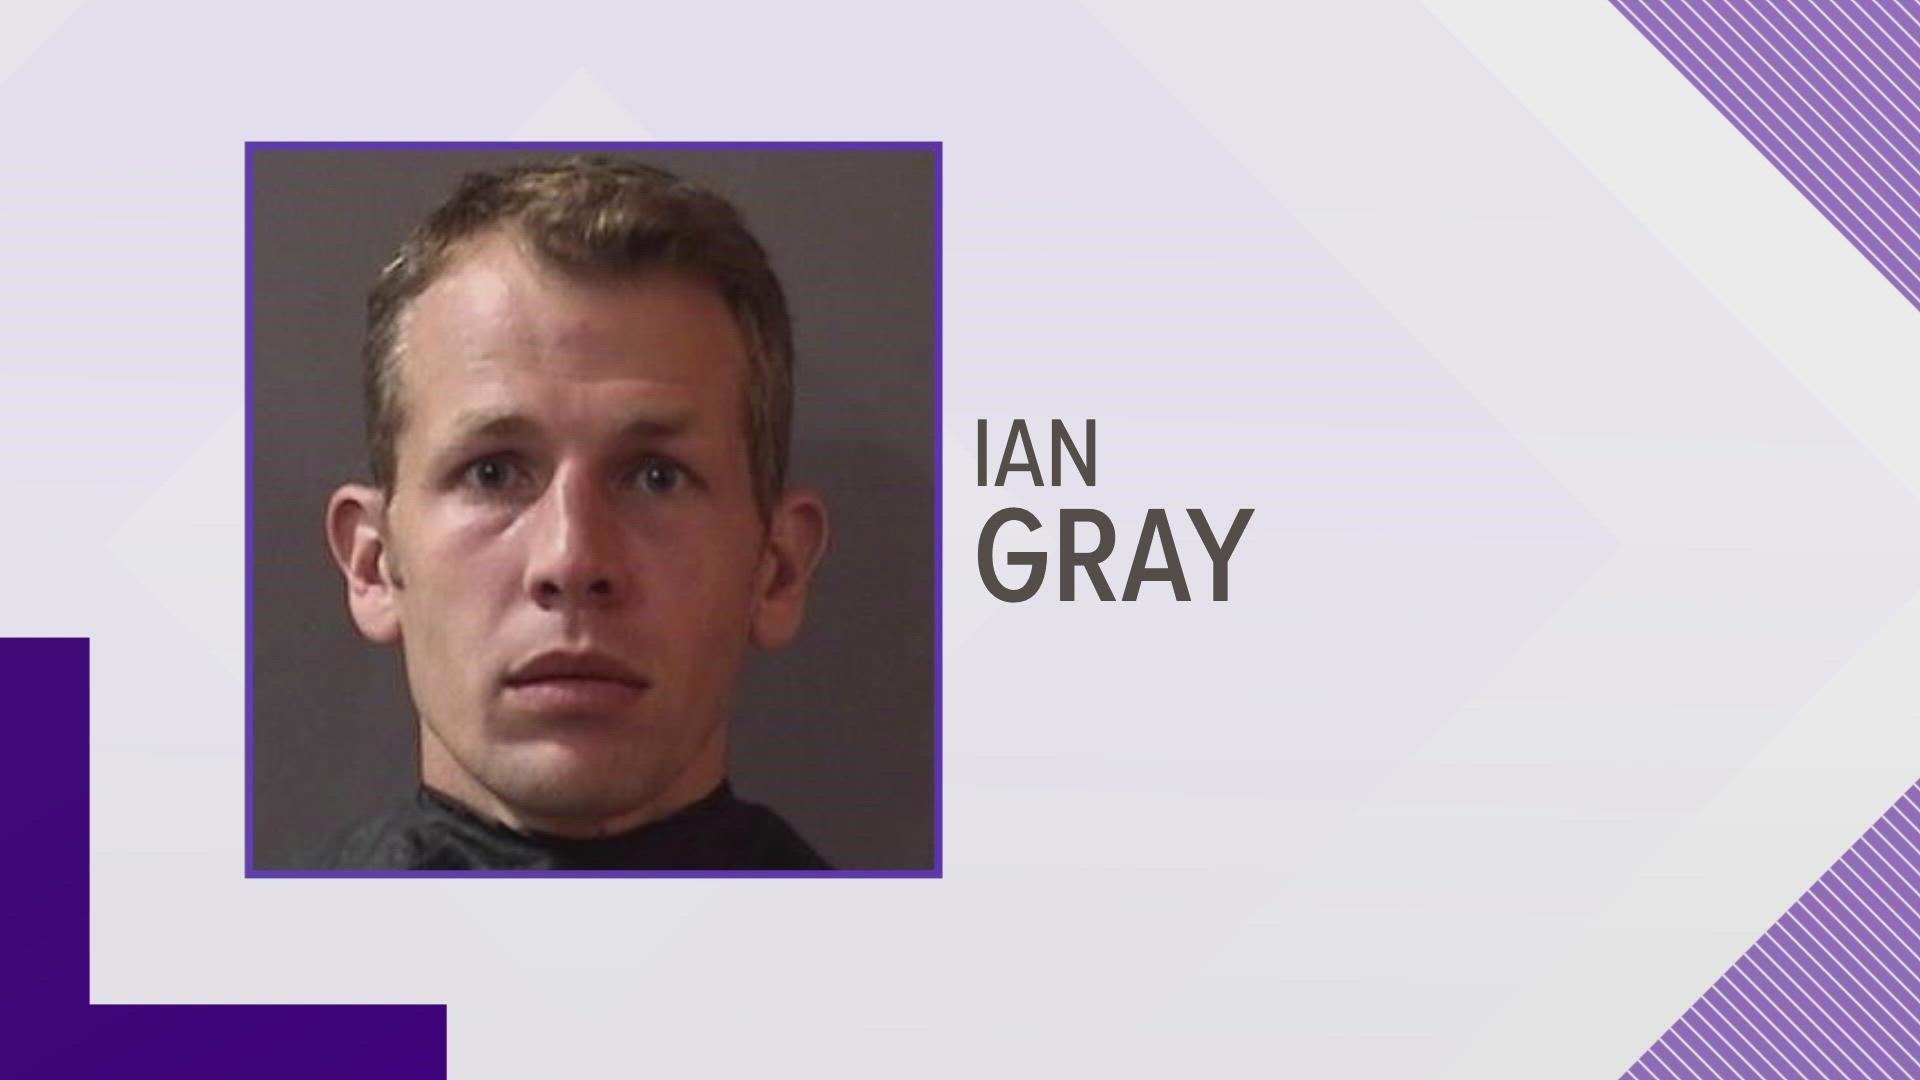 Ian Gray is accused of molesting a 6th grade student at Hamilton Southeastern at least 10 times.